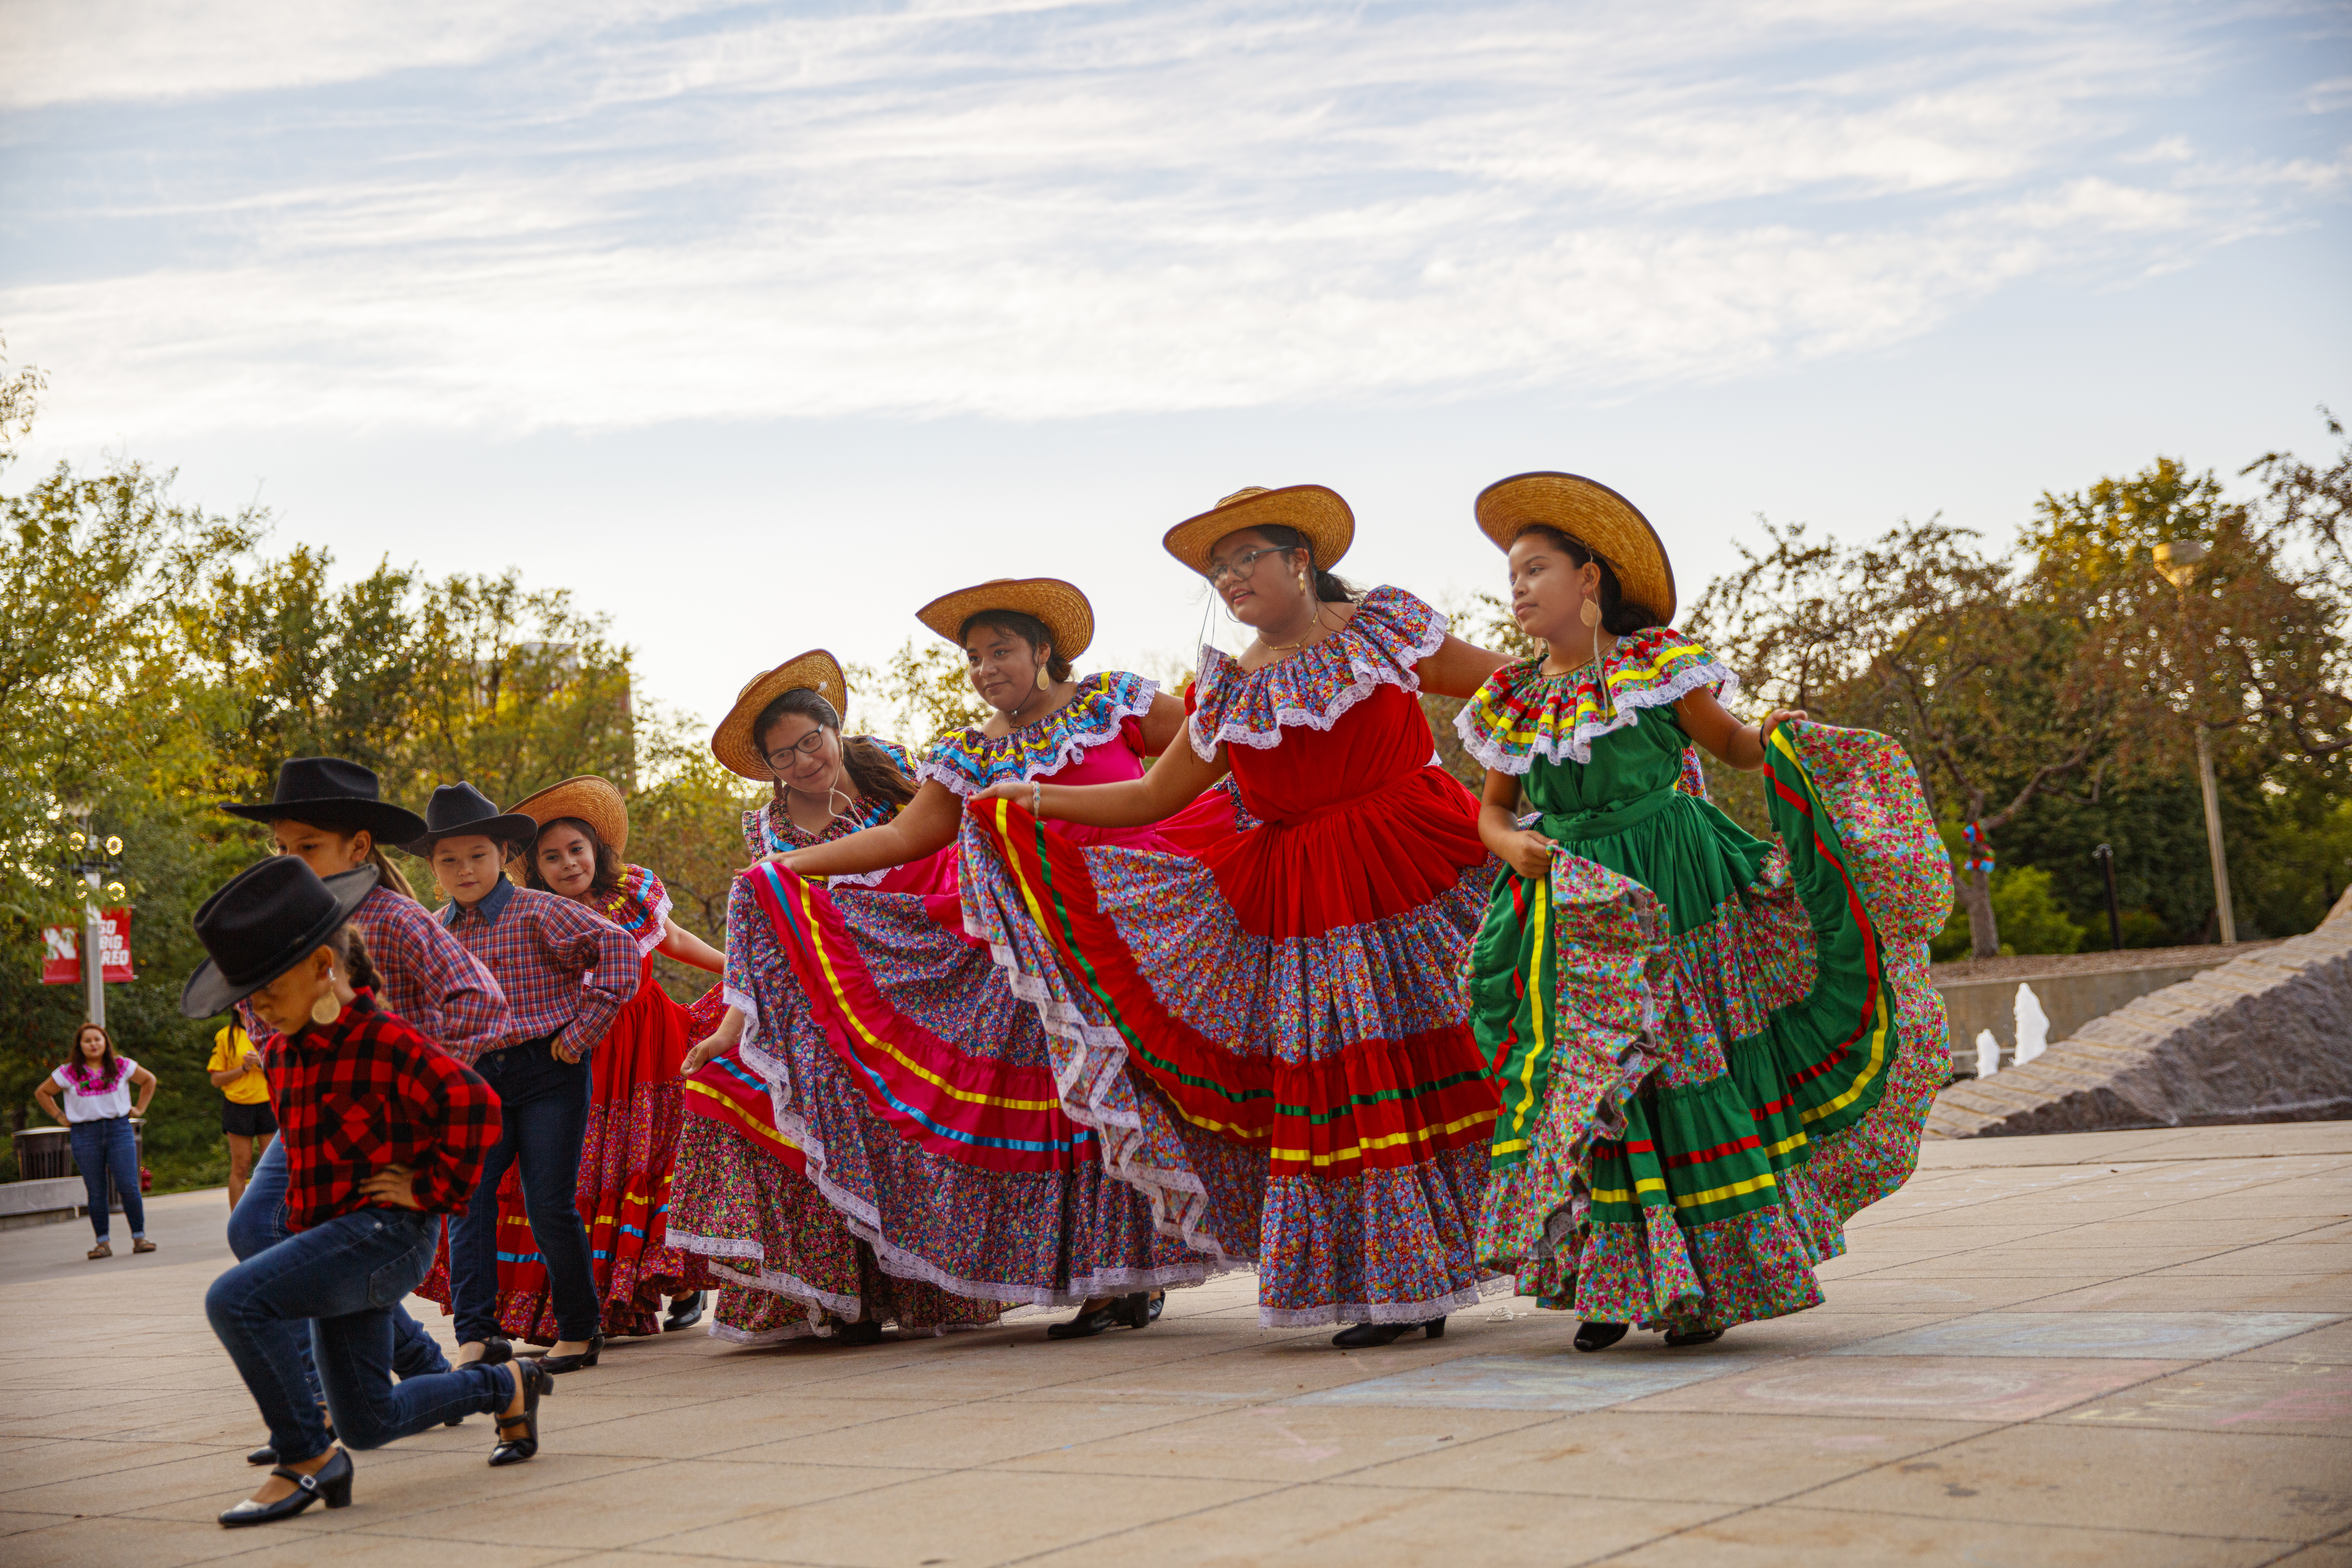 Dancers perform at the Fiesta on the Green festival.